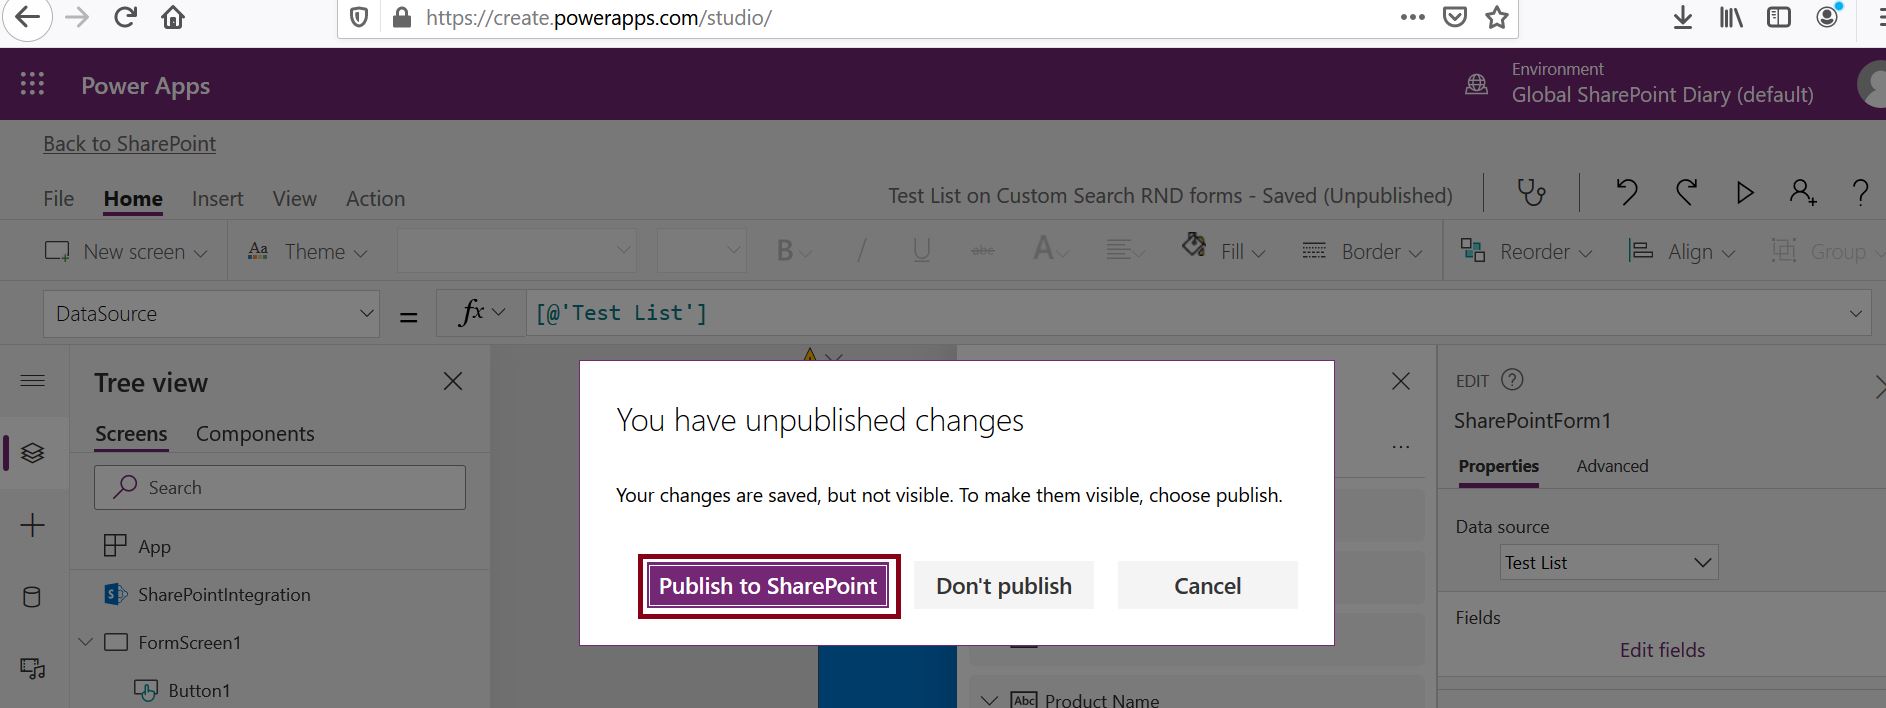 How to publish PowerApps in SharePoint Online site - Publish to SharePoint